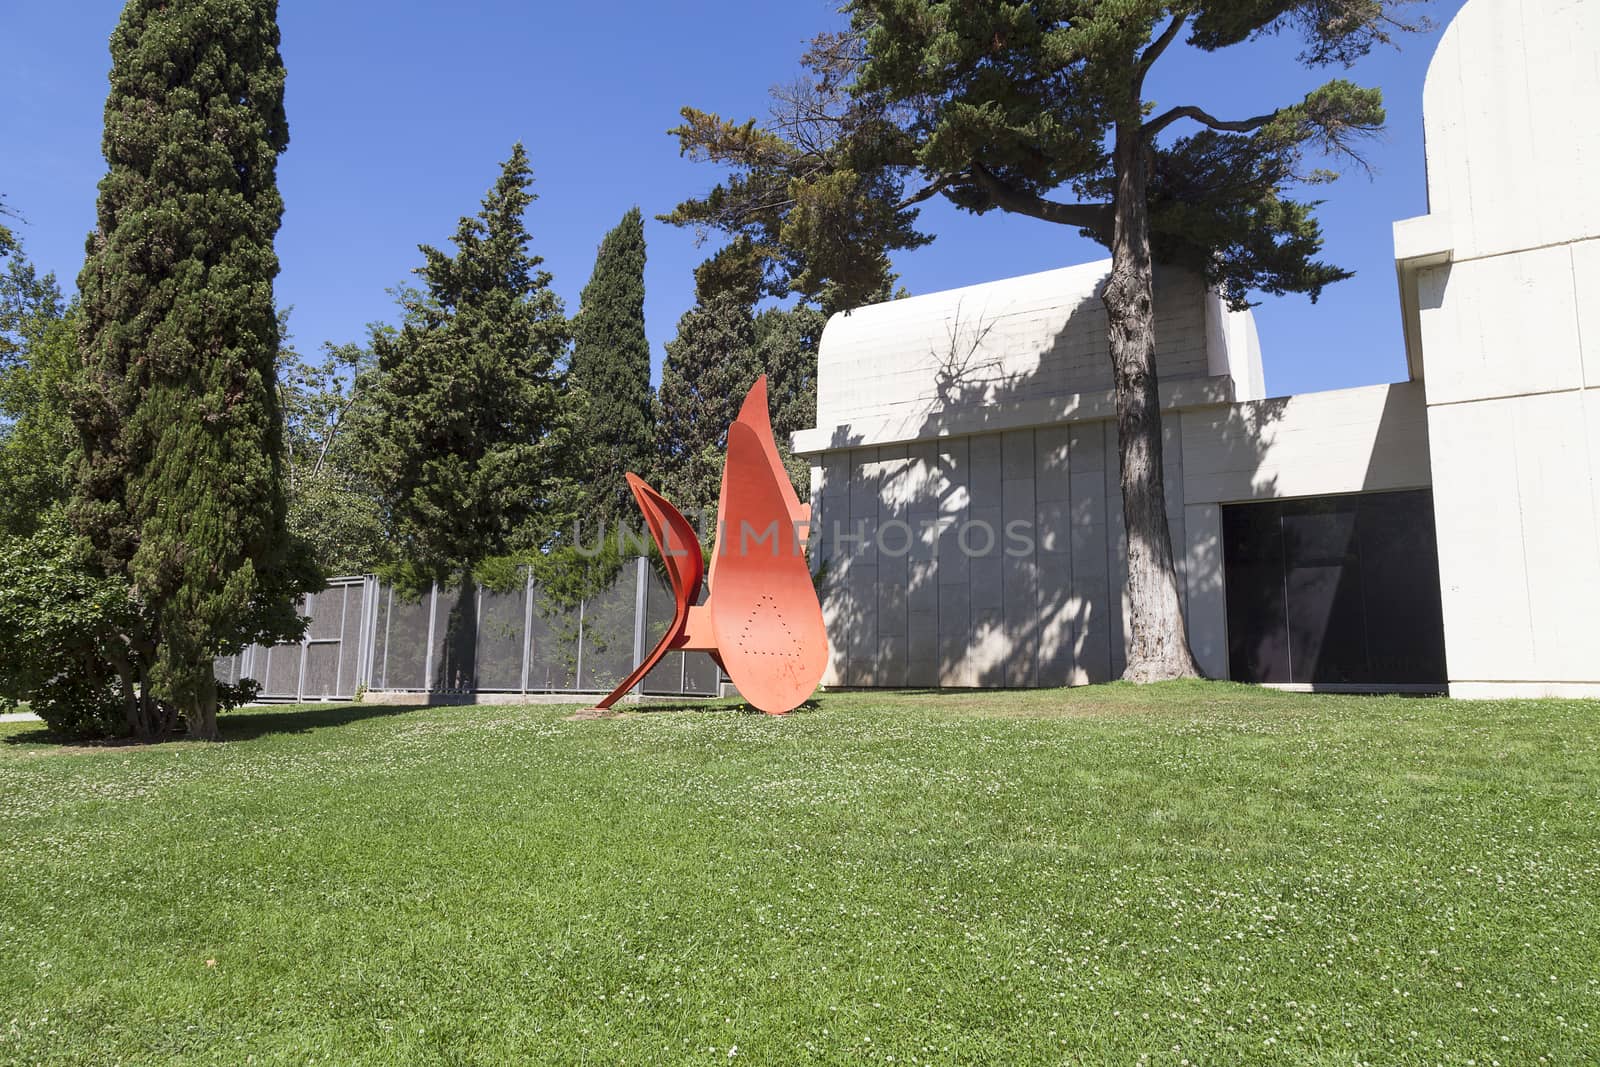 Sculpture 4 Wings by Alexander Calder before entering to Joan Miro, Barcelona, Spain by mychadre77